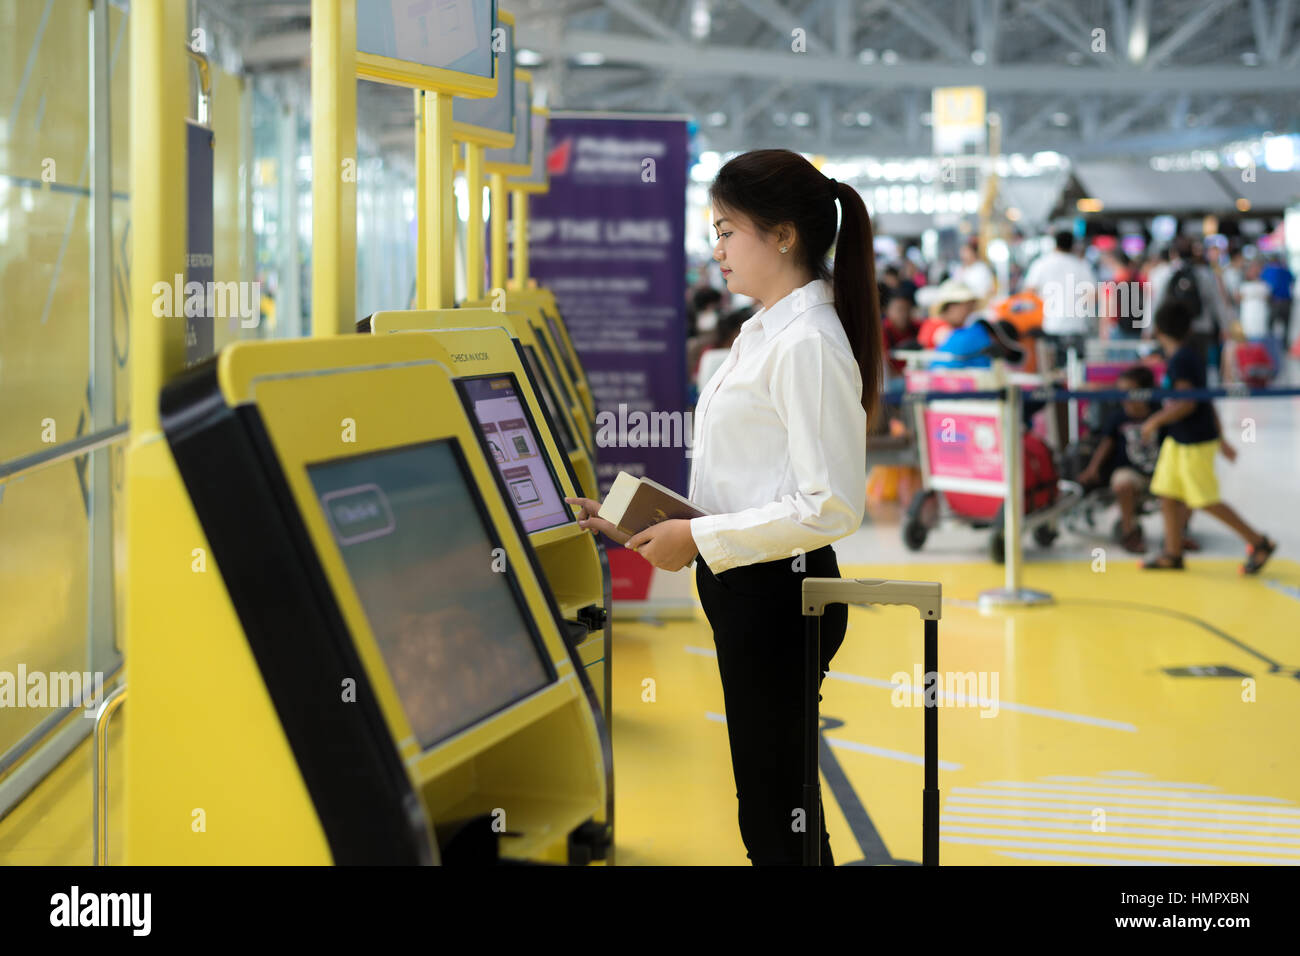 Young Asian businesswoman using self check-in kiosks in airport. Technology in airport. Stock Photo